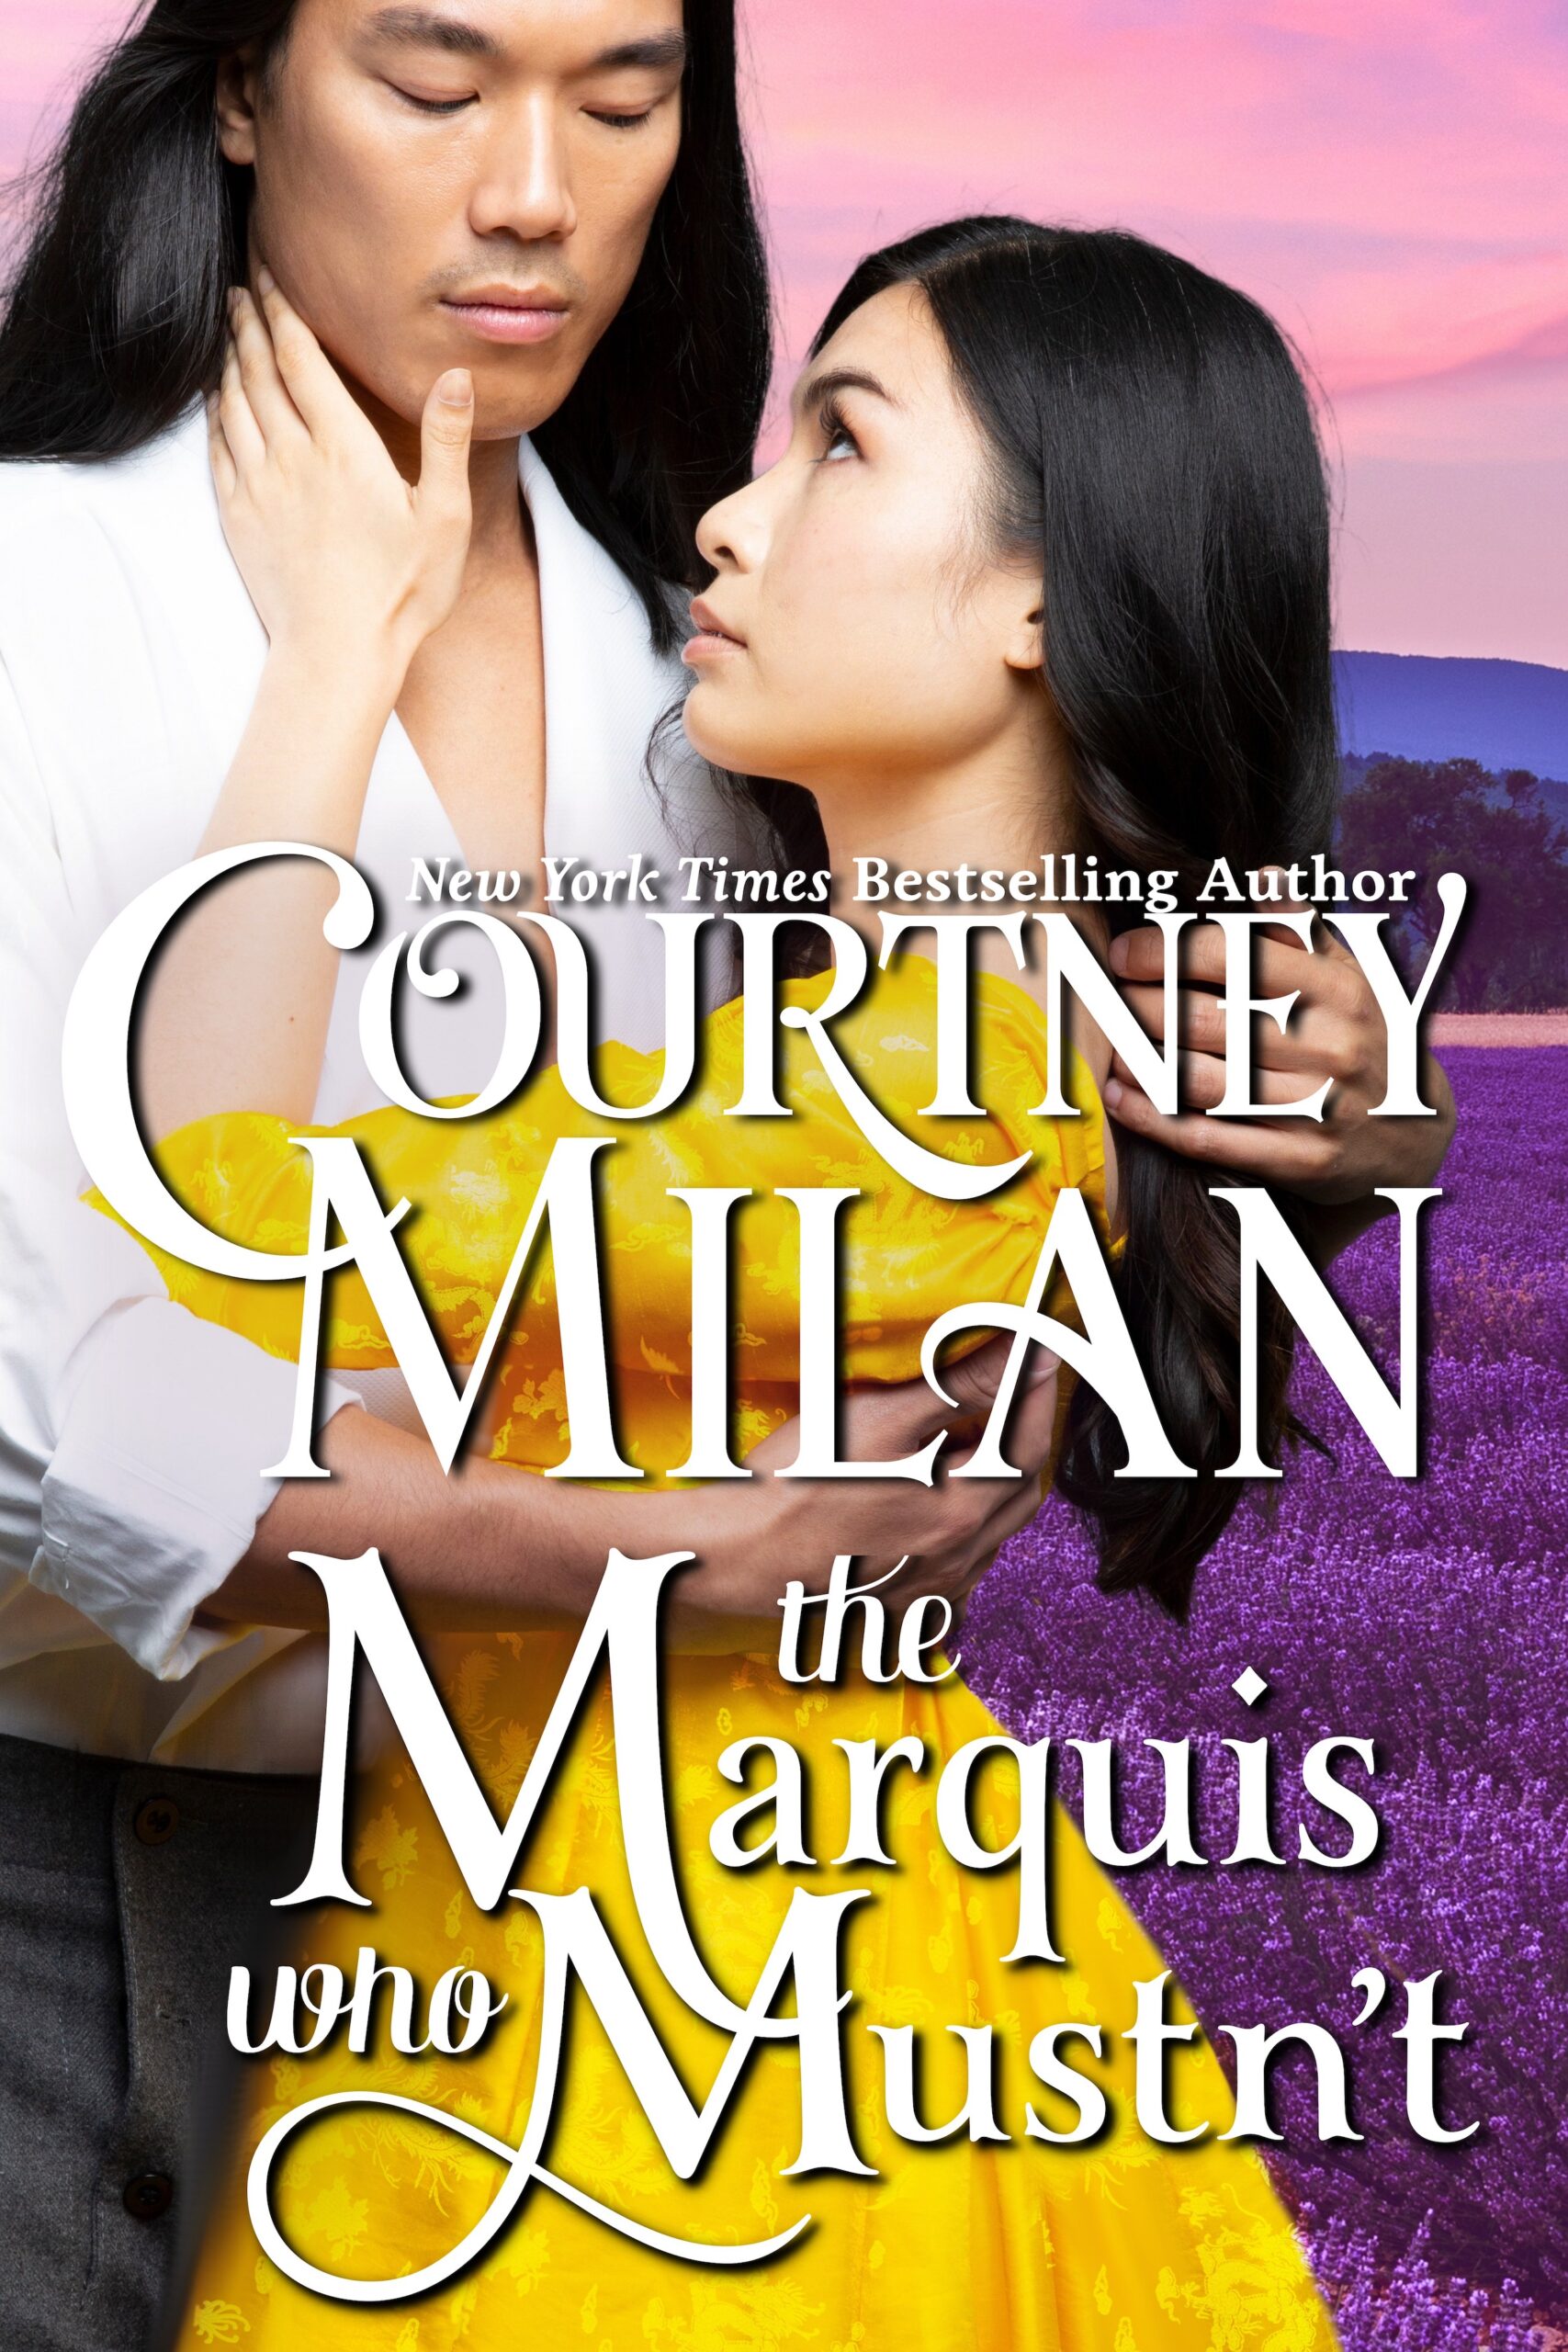 The Marquis who Mustn't by Courtney Milan: a Chinese man embraces an asian woman